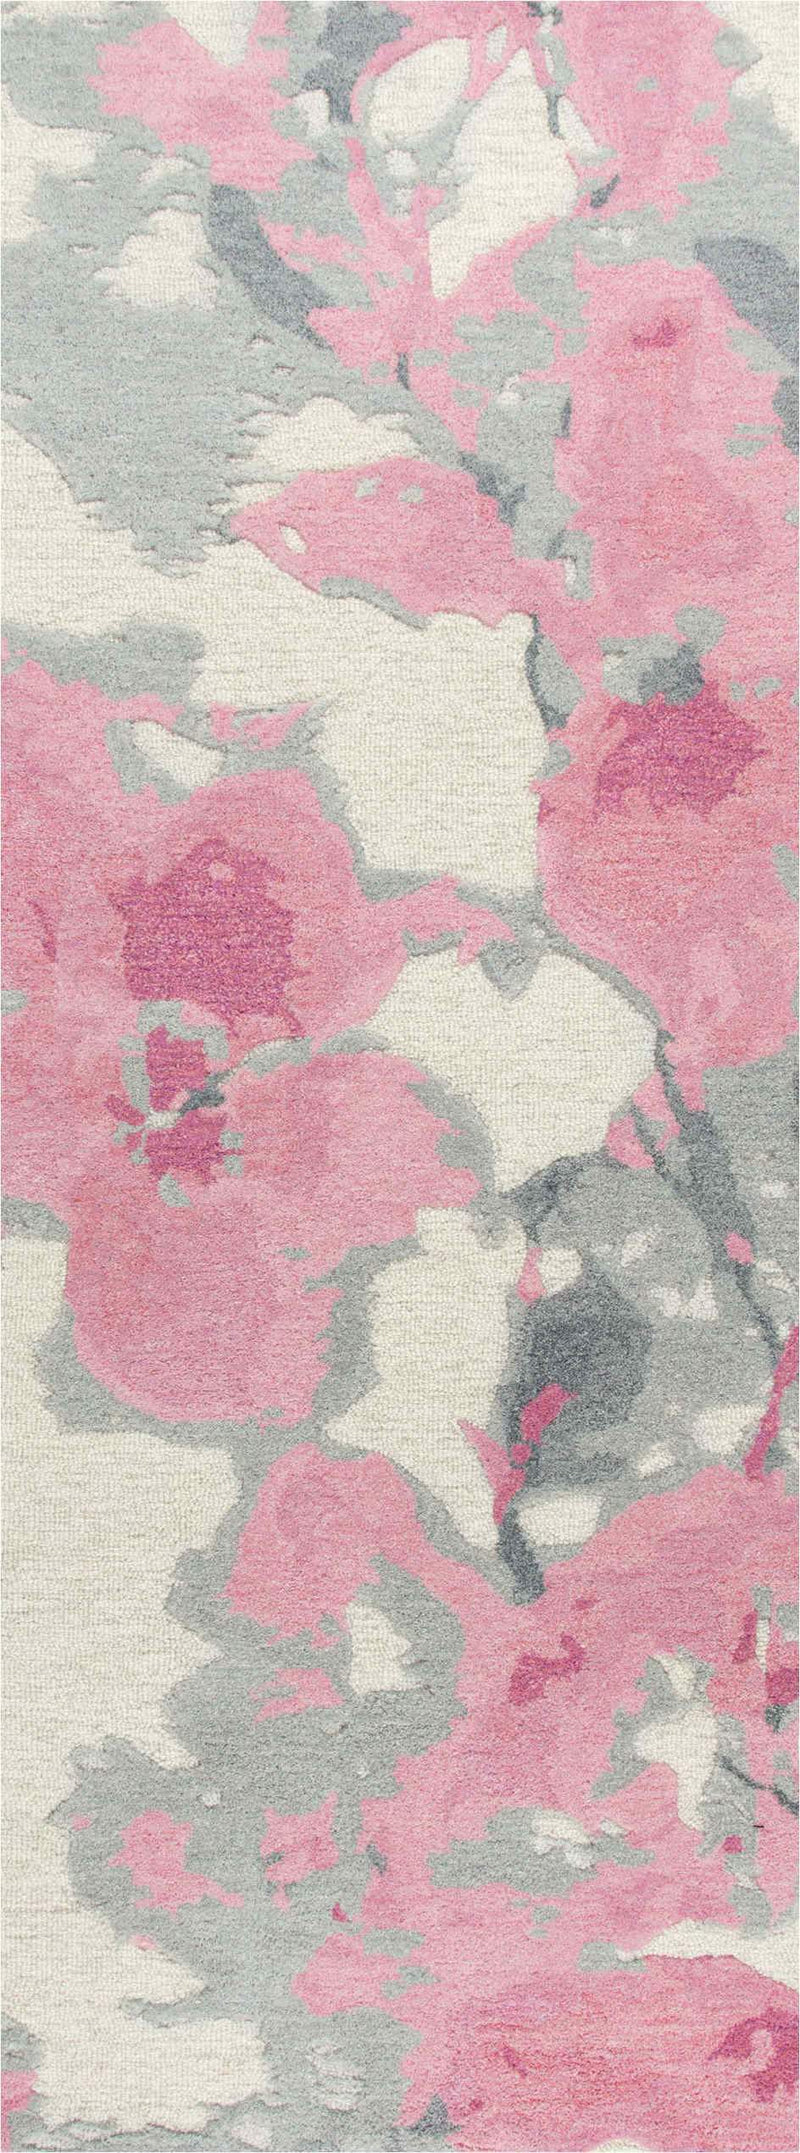 Rizzy Home Area Rugs Connie Post Area Rugs CNP108 Beige-Pink Modern 100% Wool With Unique Shapes